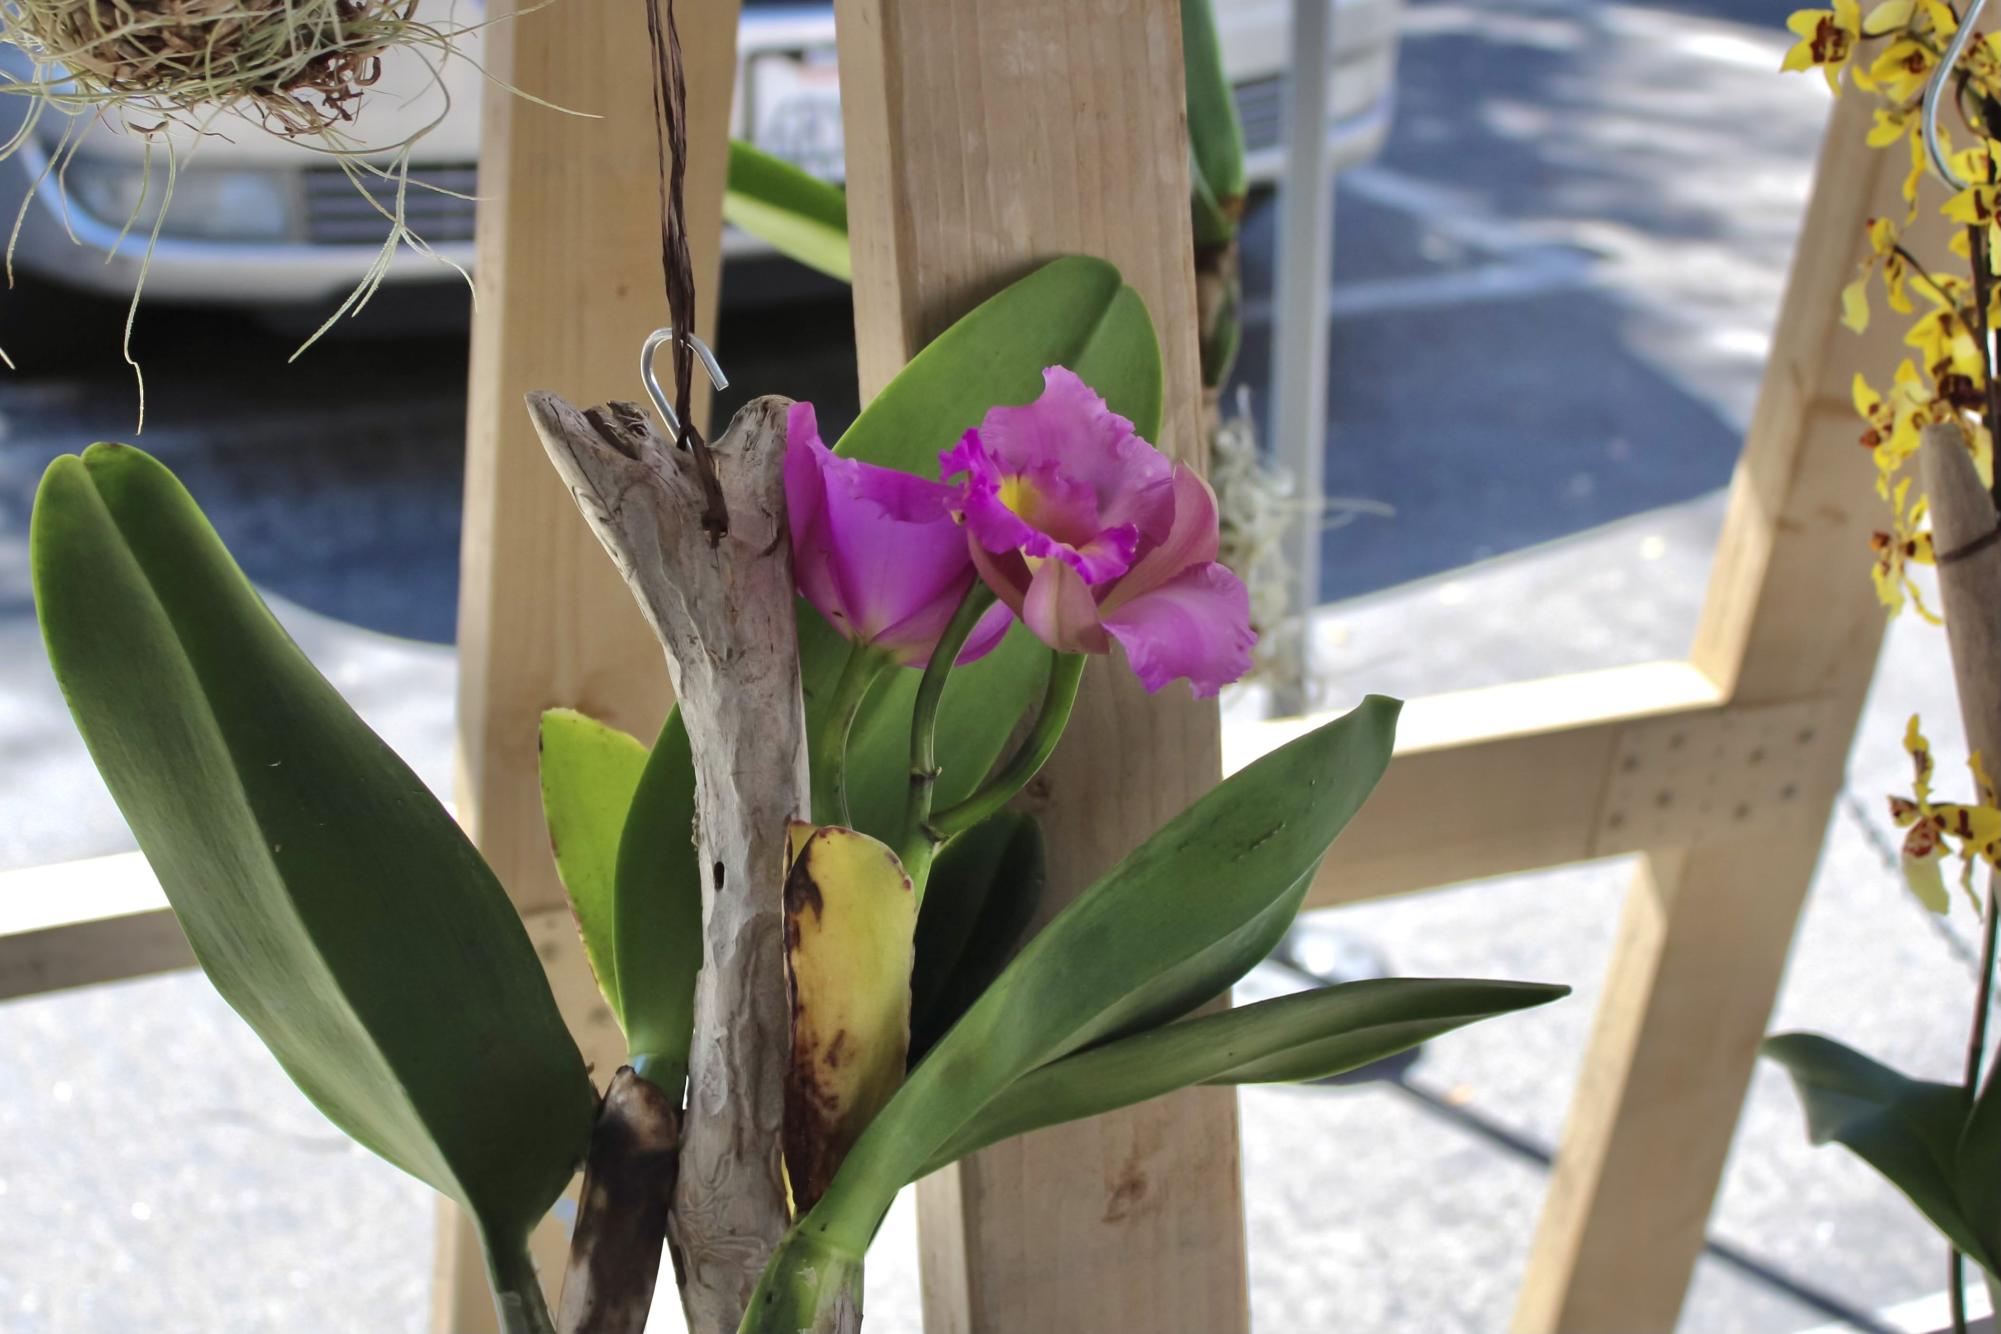 According to Bernardo, cattleya orchids’ fragrance is what makes them attractive. She imports them directly from Hawaii, where they can be found in the wild.